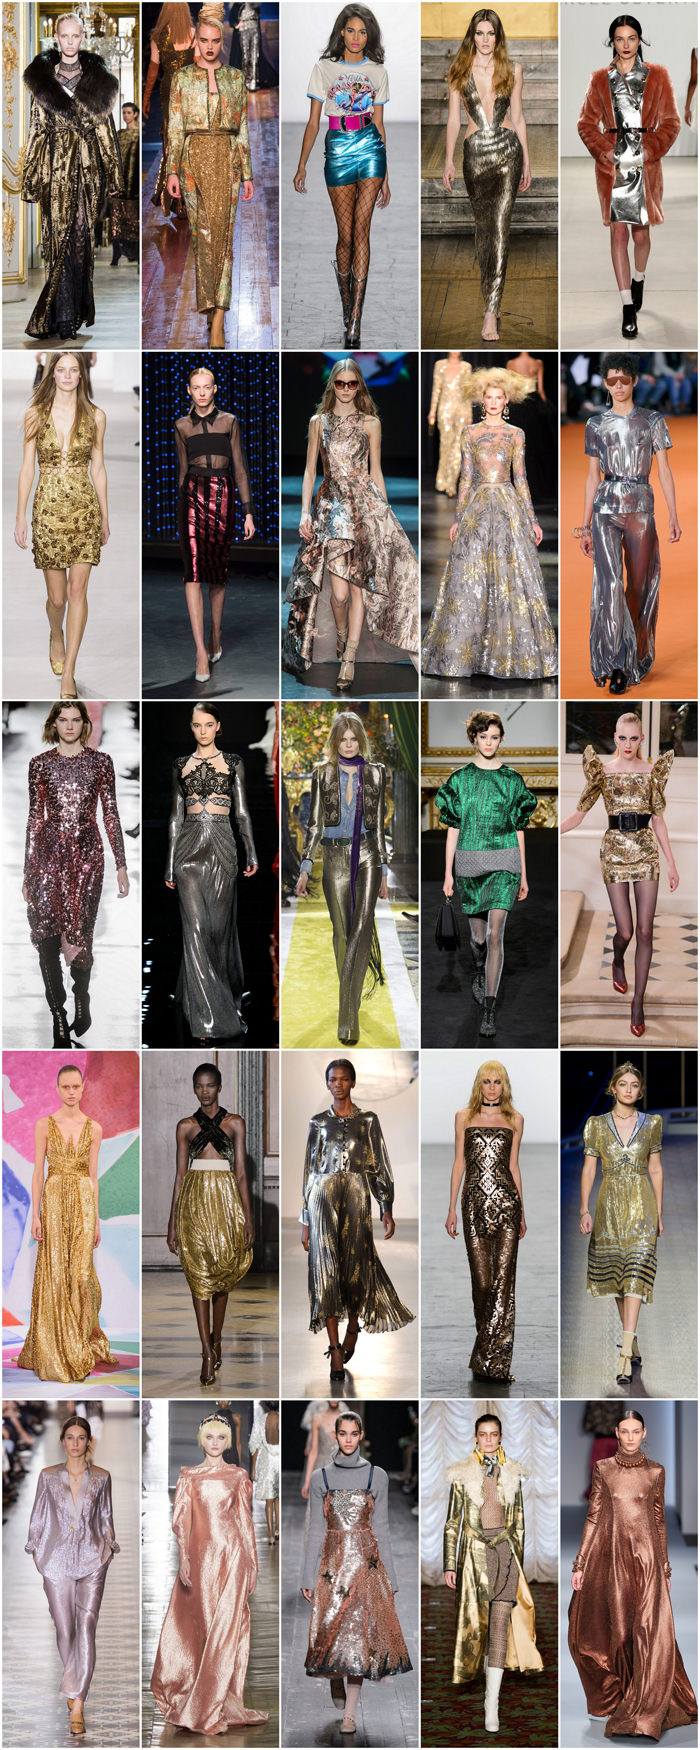 Fall-2016-Collections-Trends-Metallics-Accessories-Bags-Shoes-Jewelry-Fashion-Tom-Lorenzo-Site (3)